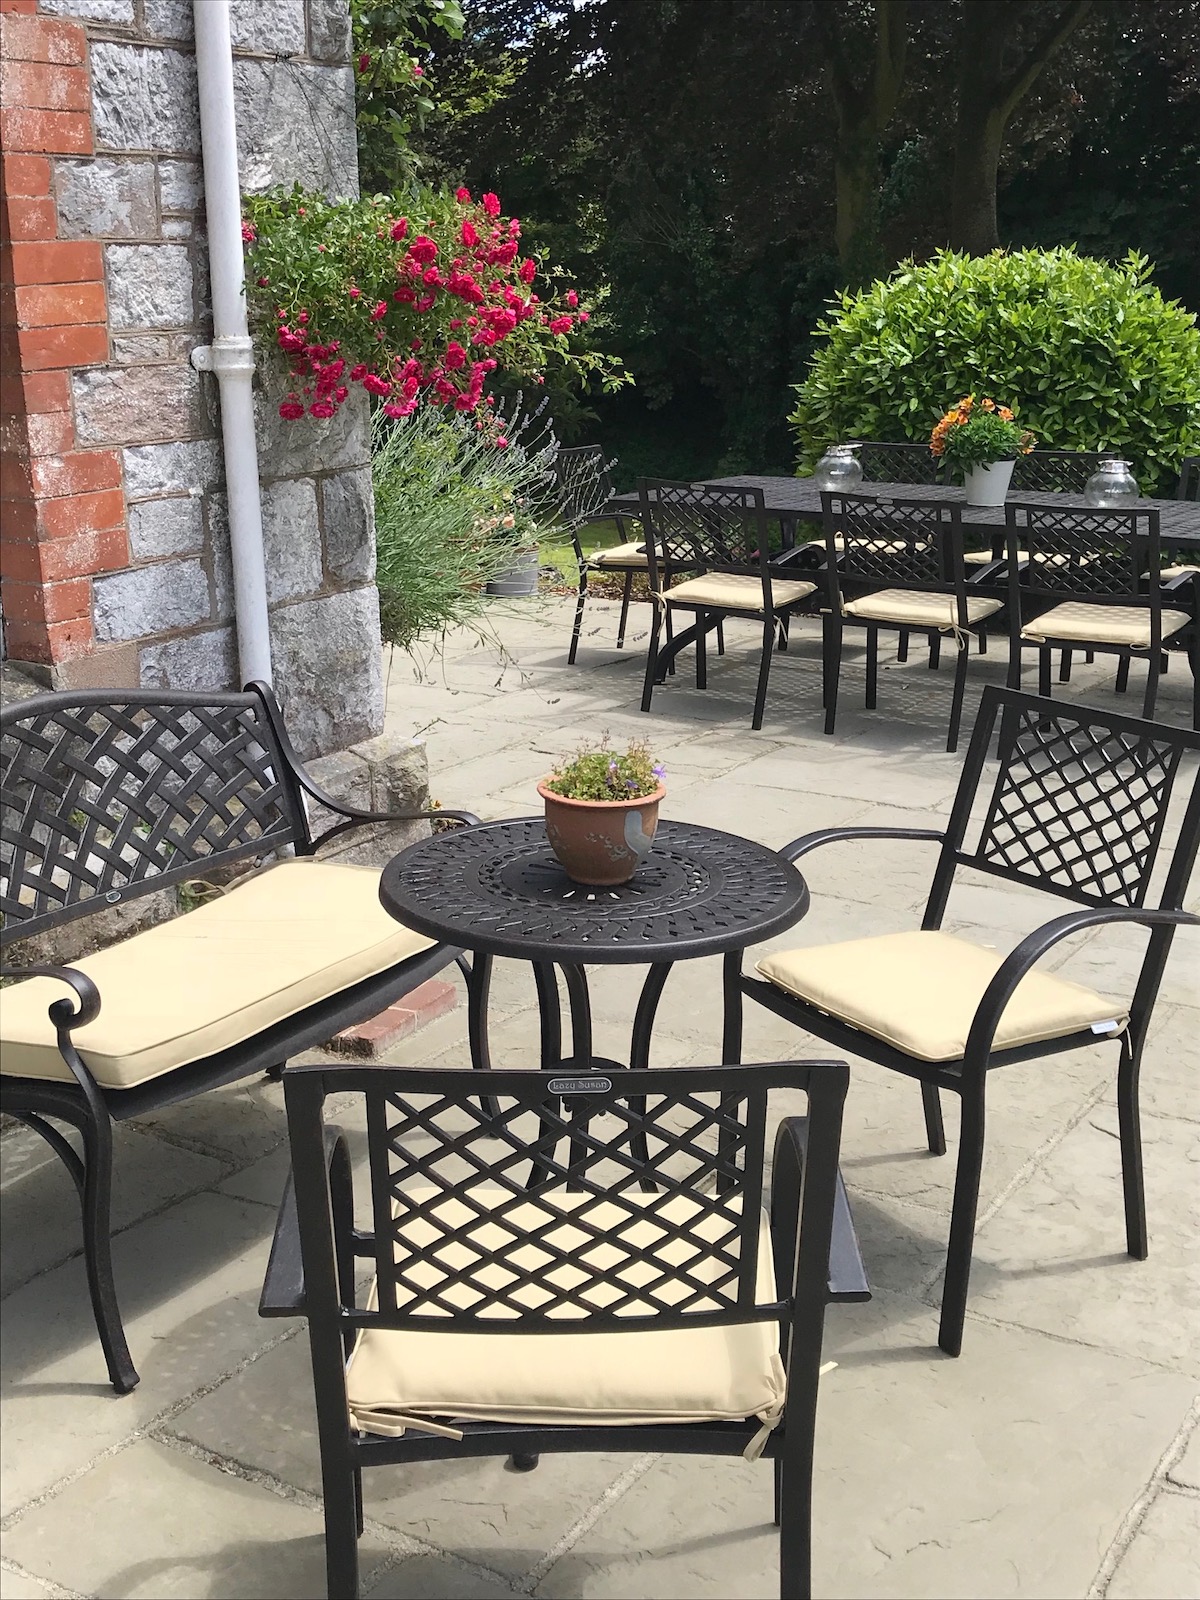 What are the advantages of buying a garden table set over individual pieces of garden furniture?